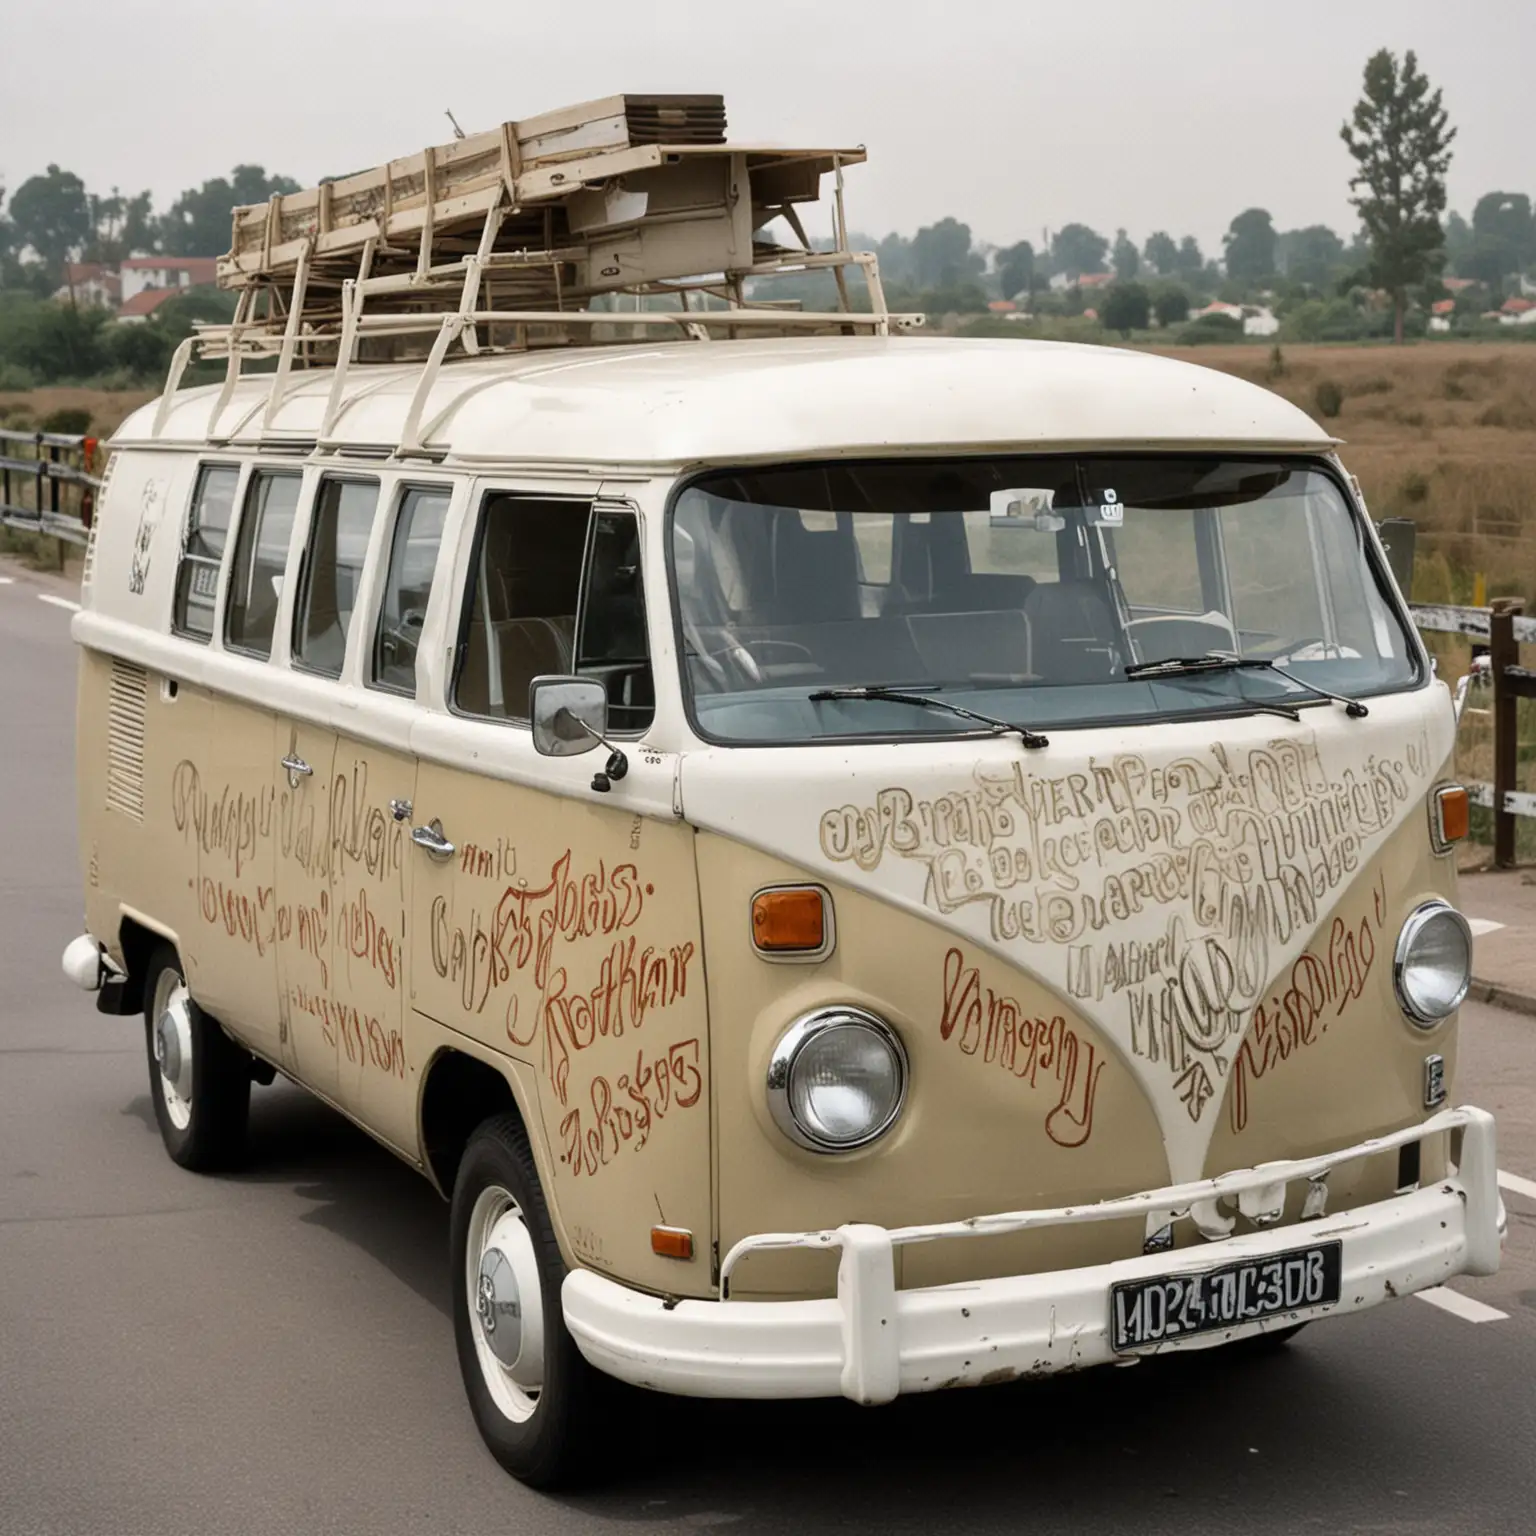 A 1966 Volkswagen Transporter featuring the words "THE END."